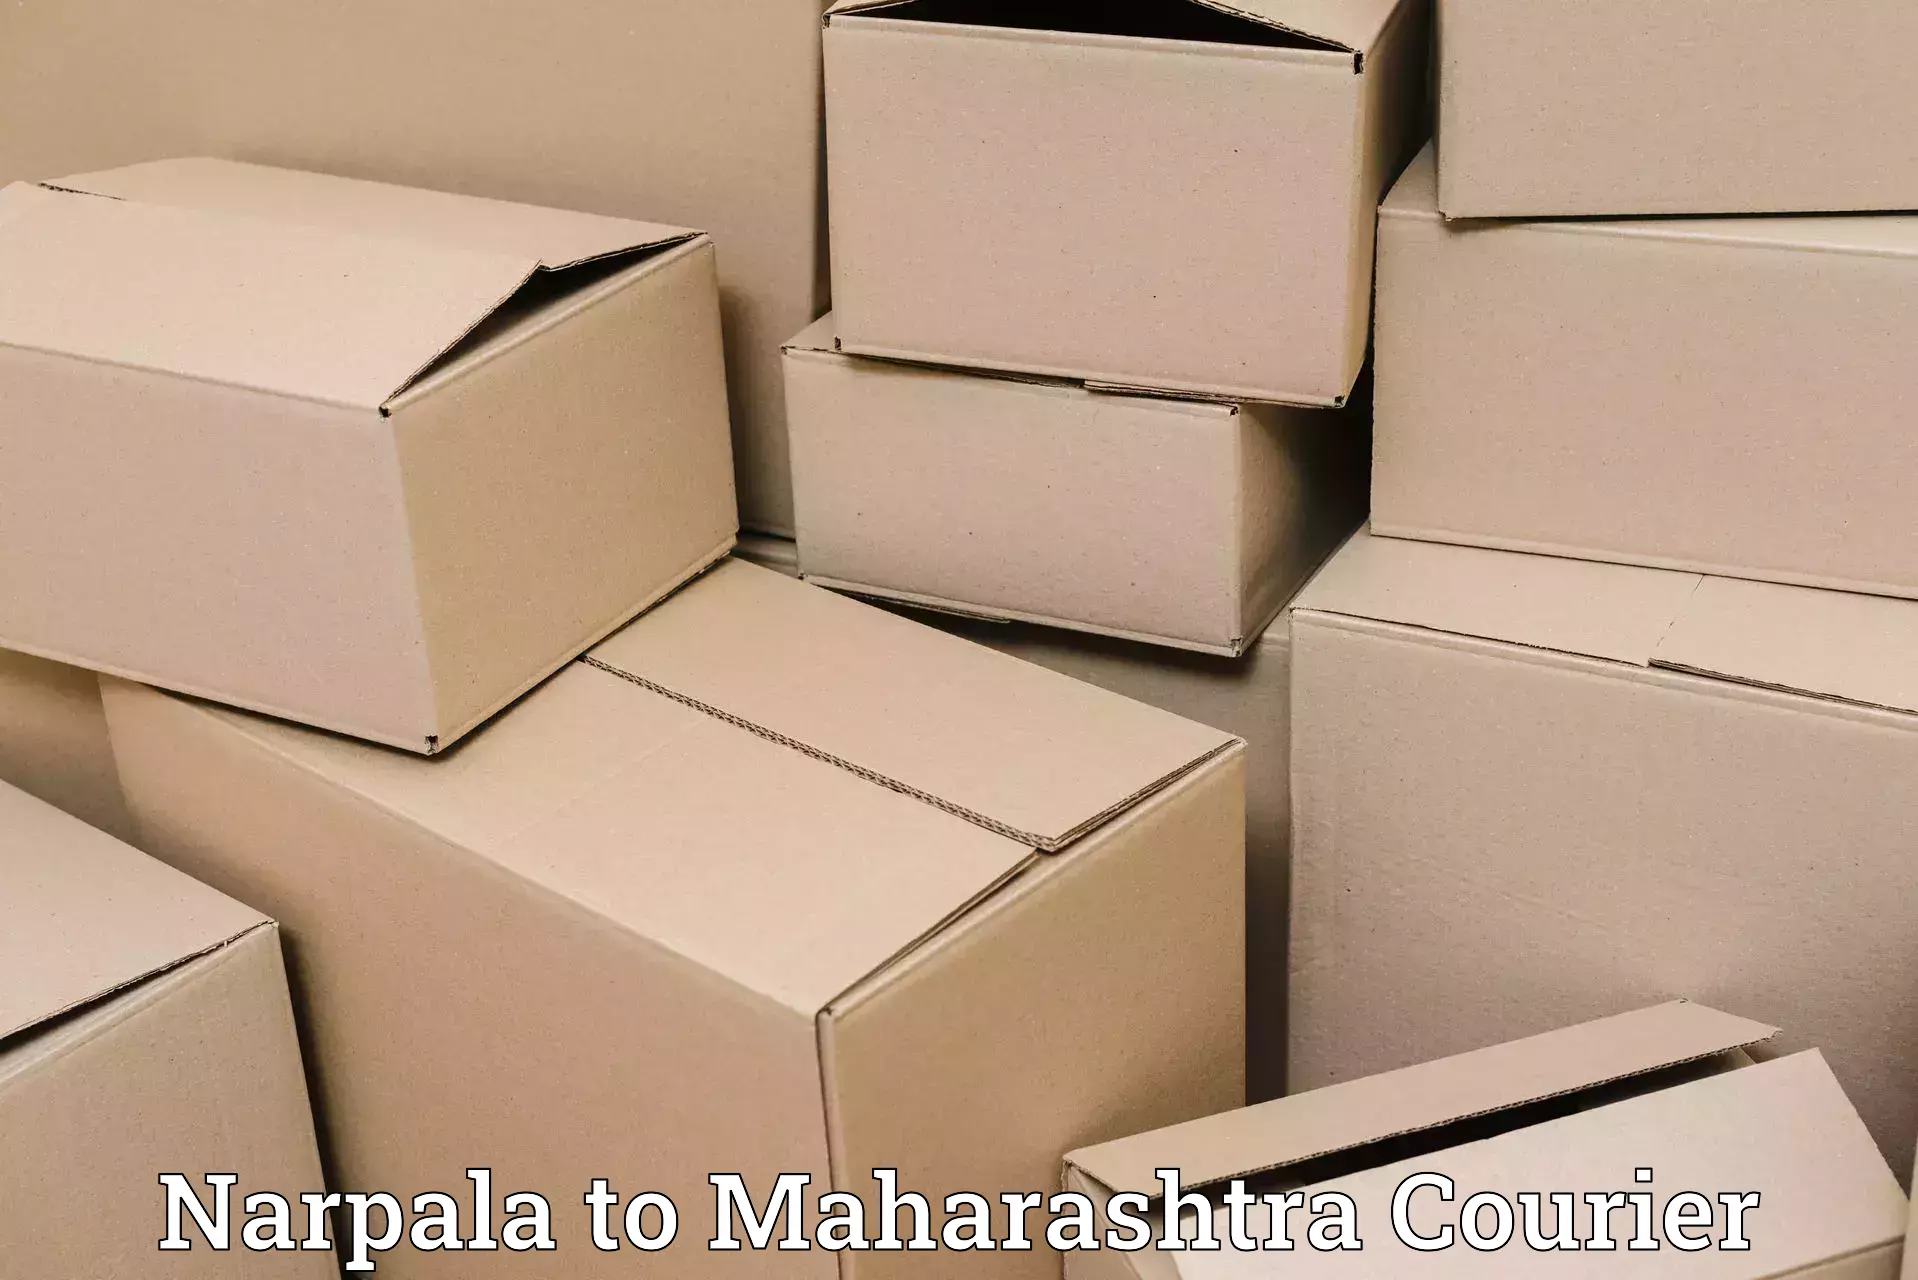 State-of-the-art courier technology Narpala to Wagholi